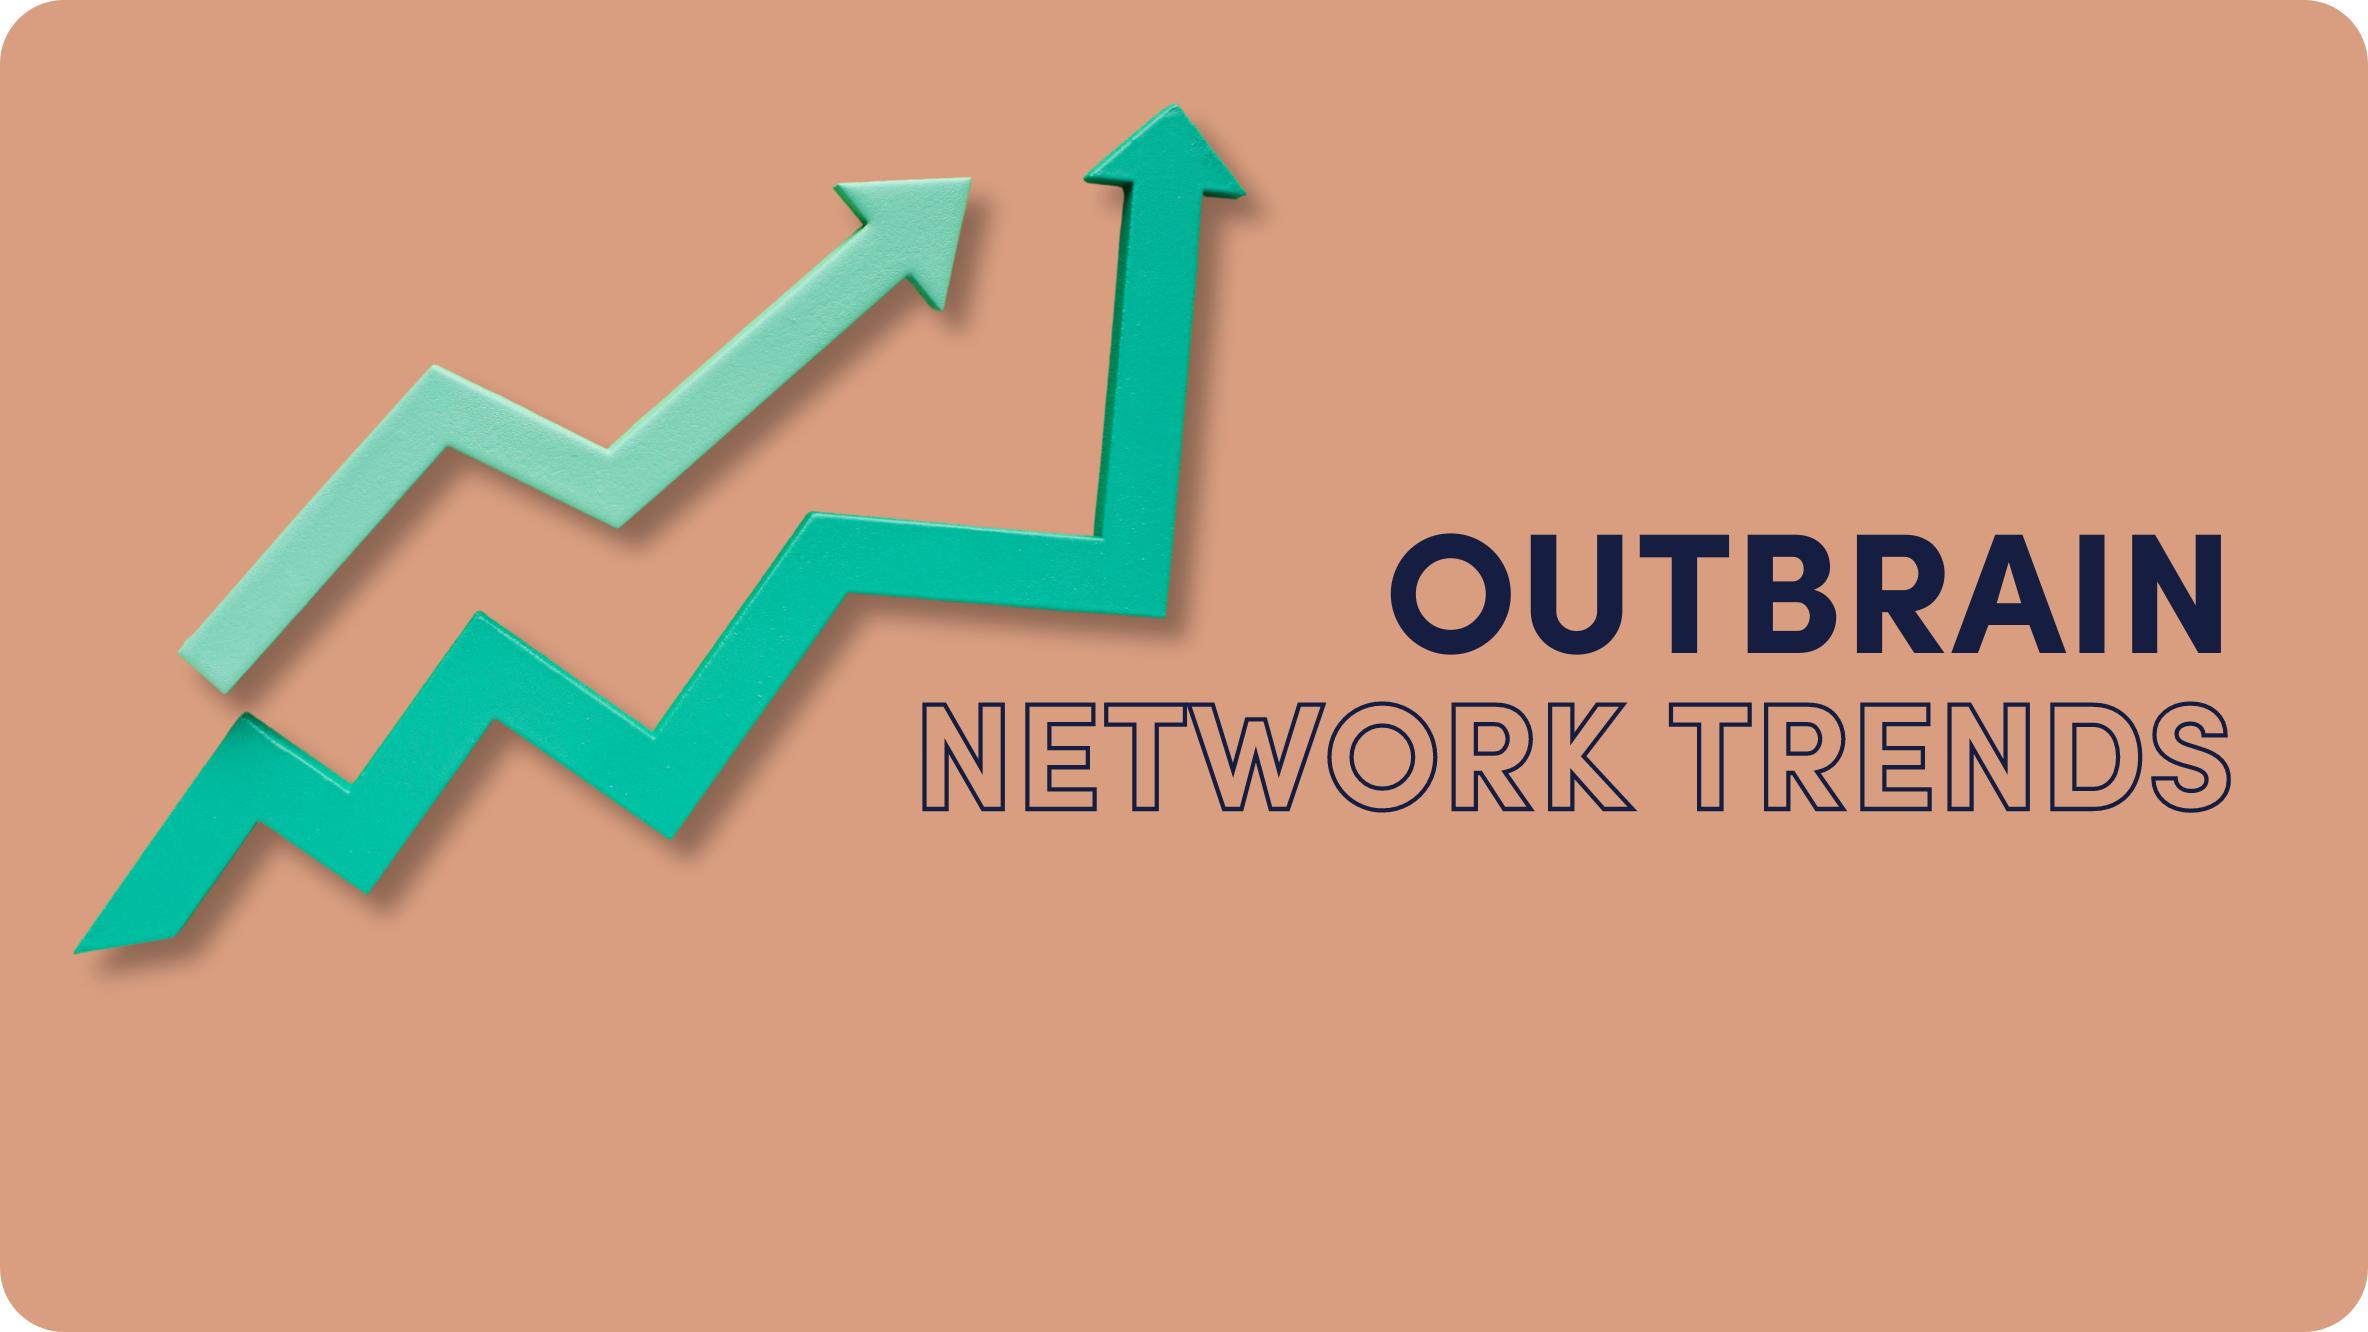 Outbrain Network Trends Available in the Overview Dashboard